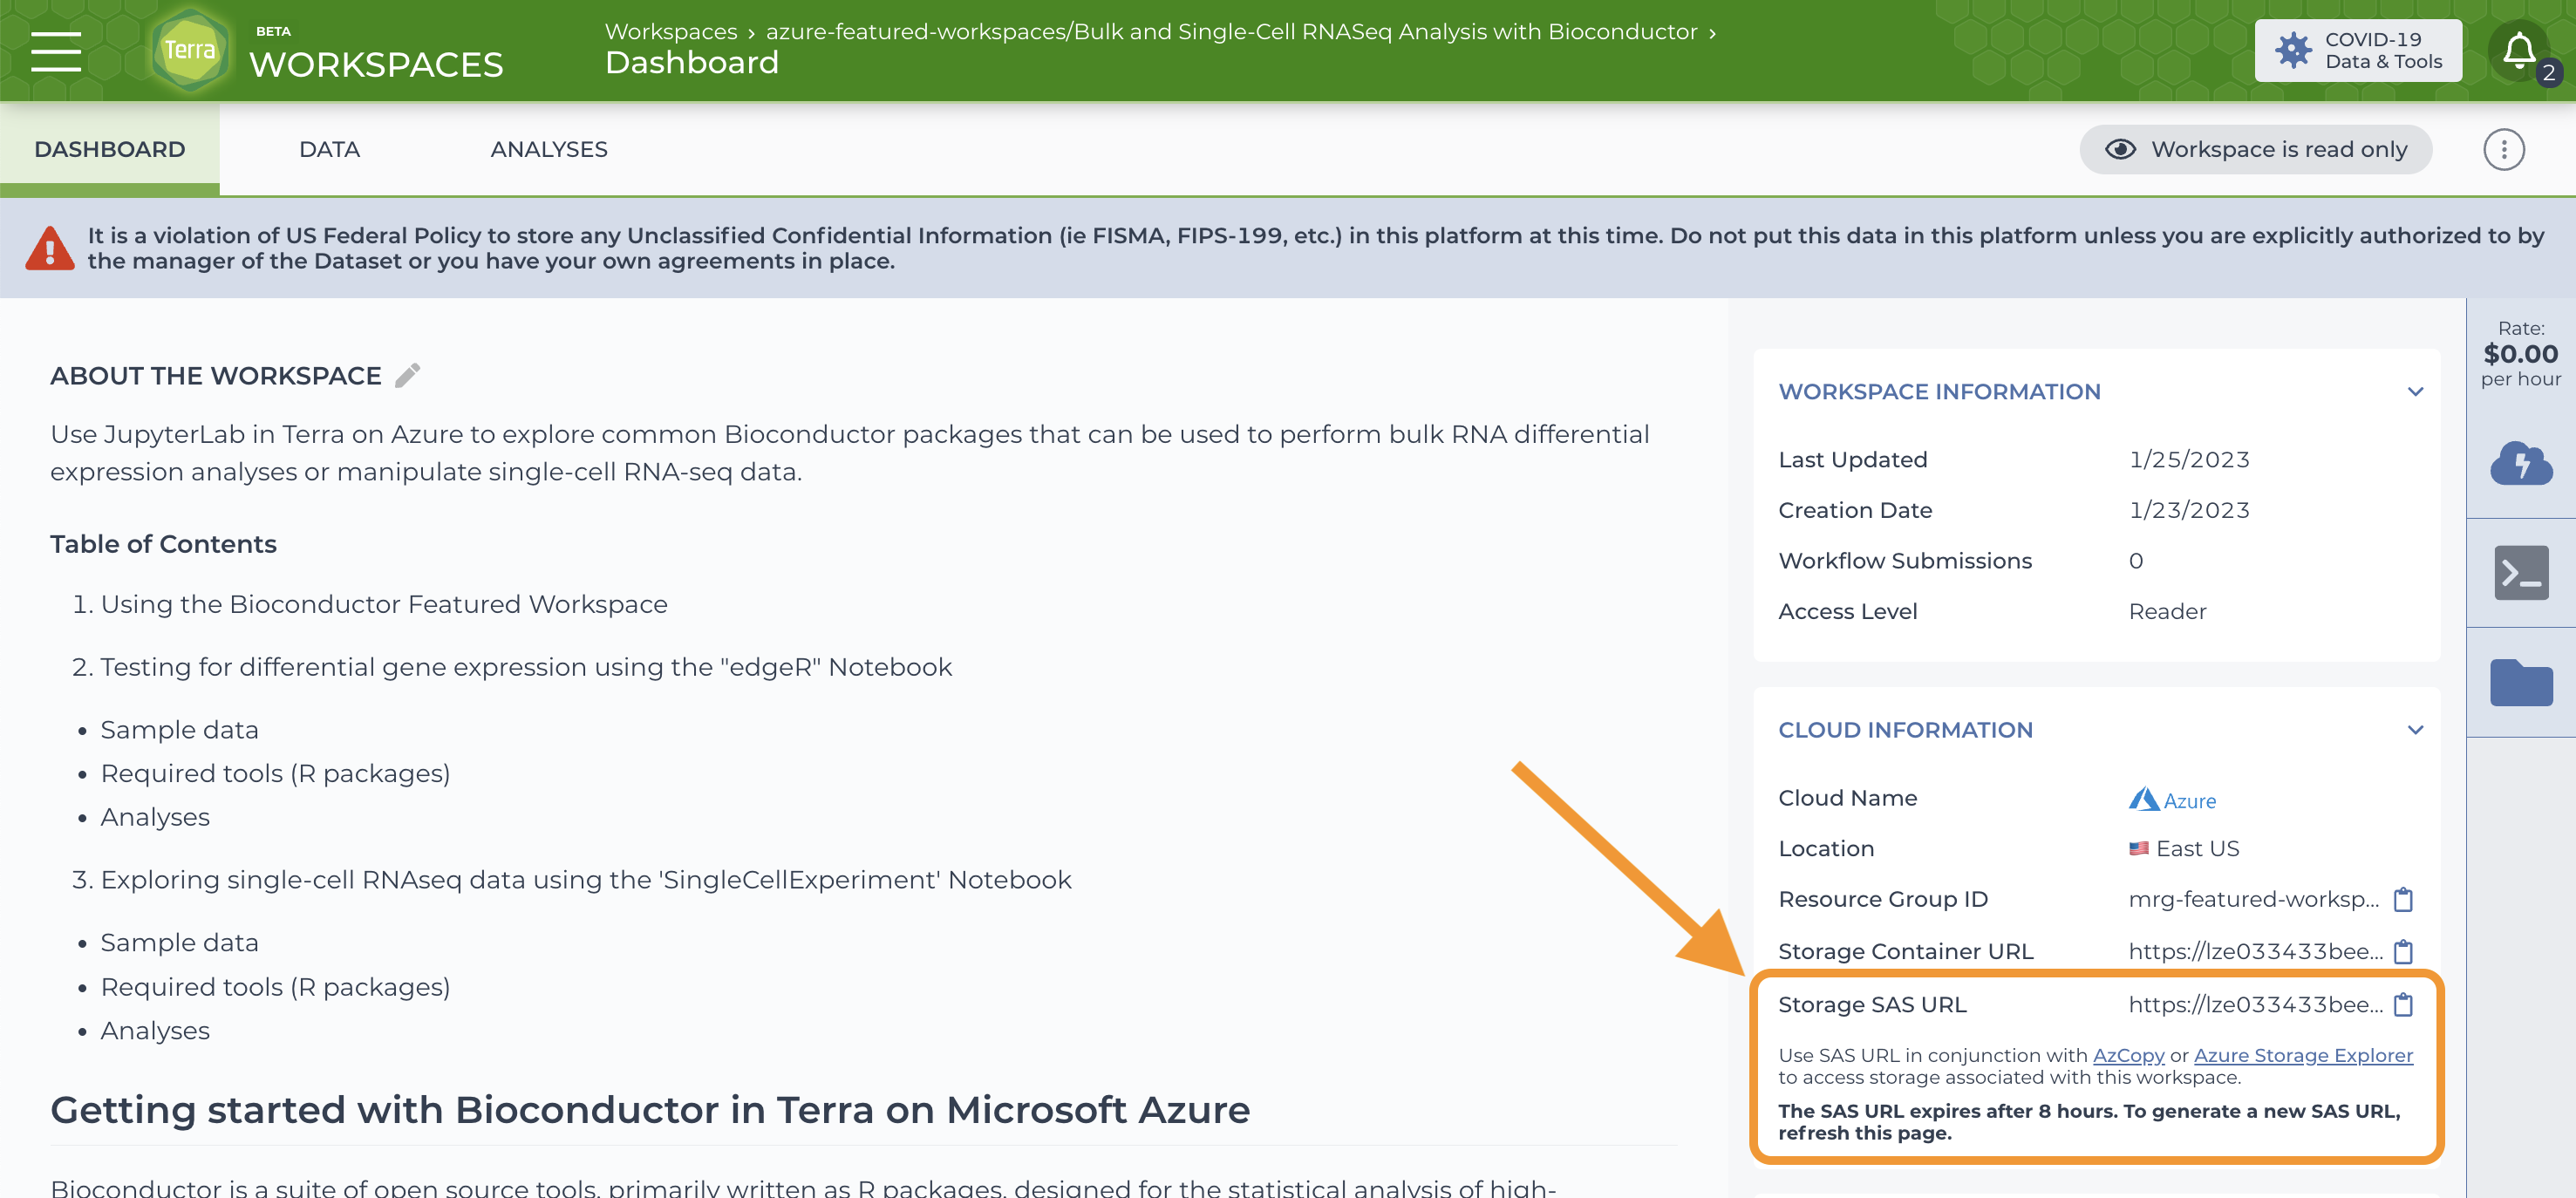 Screenshot of SAS token in Cloud Information section at right in the Dashboard of Terra on Azure workspace